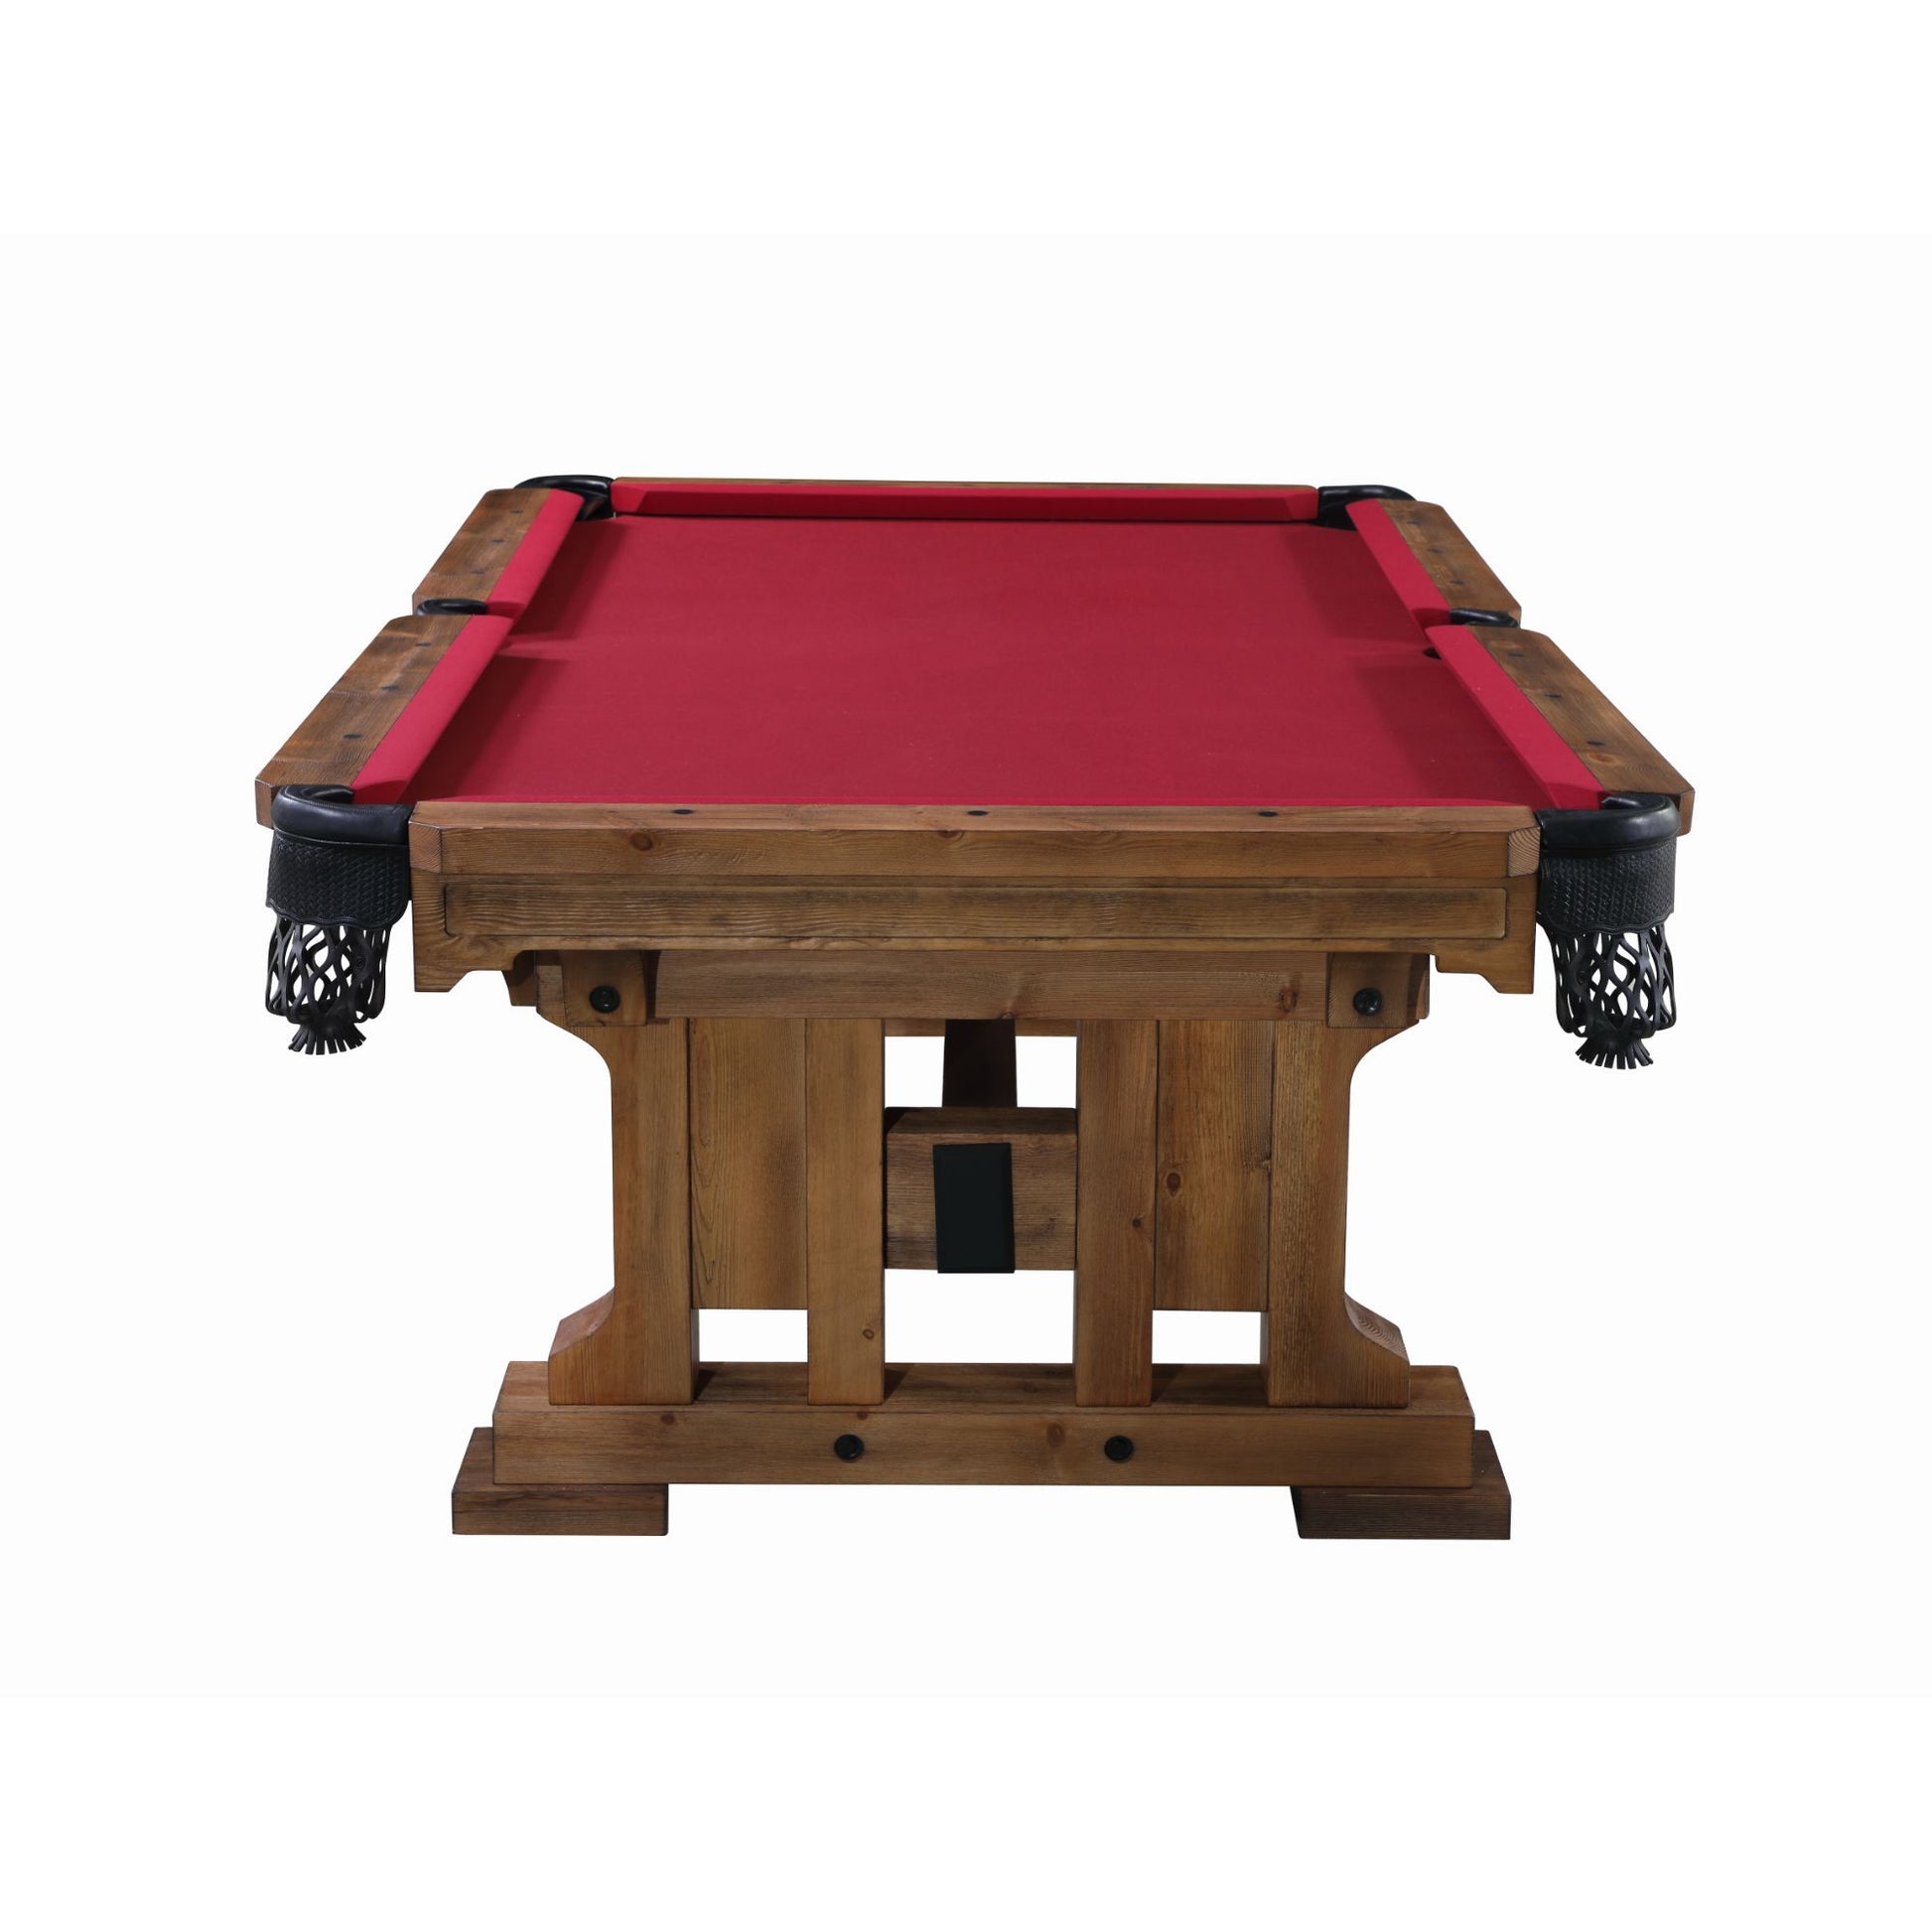 Playcraft Colorado Slate Pool Table with Optional Dining Top - Gaming Blaze